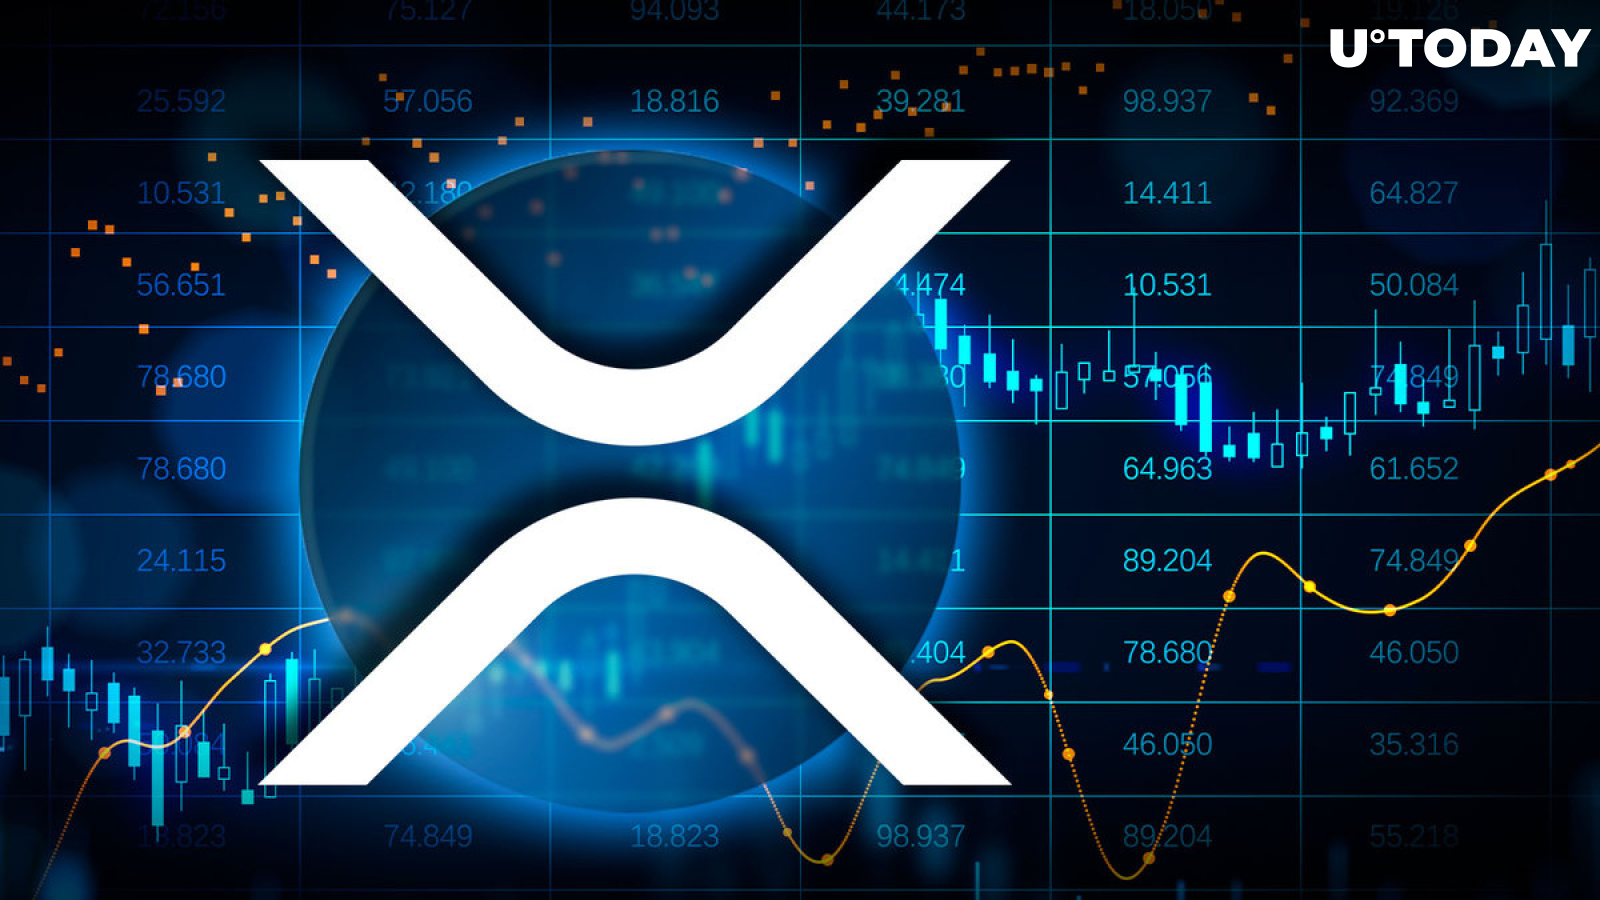 XRP Scores Major Listing on This Crypto Exchange: Details